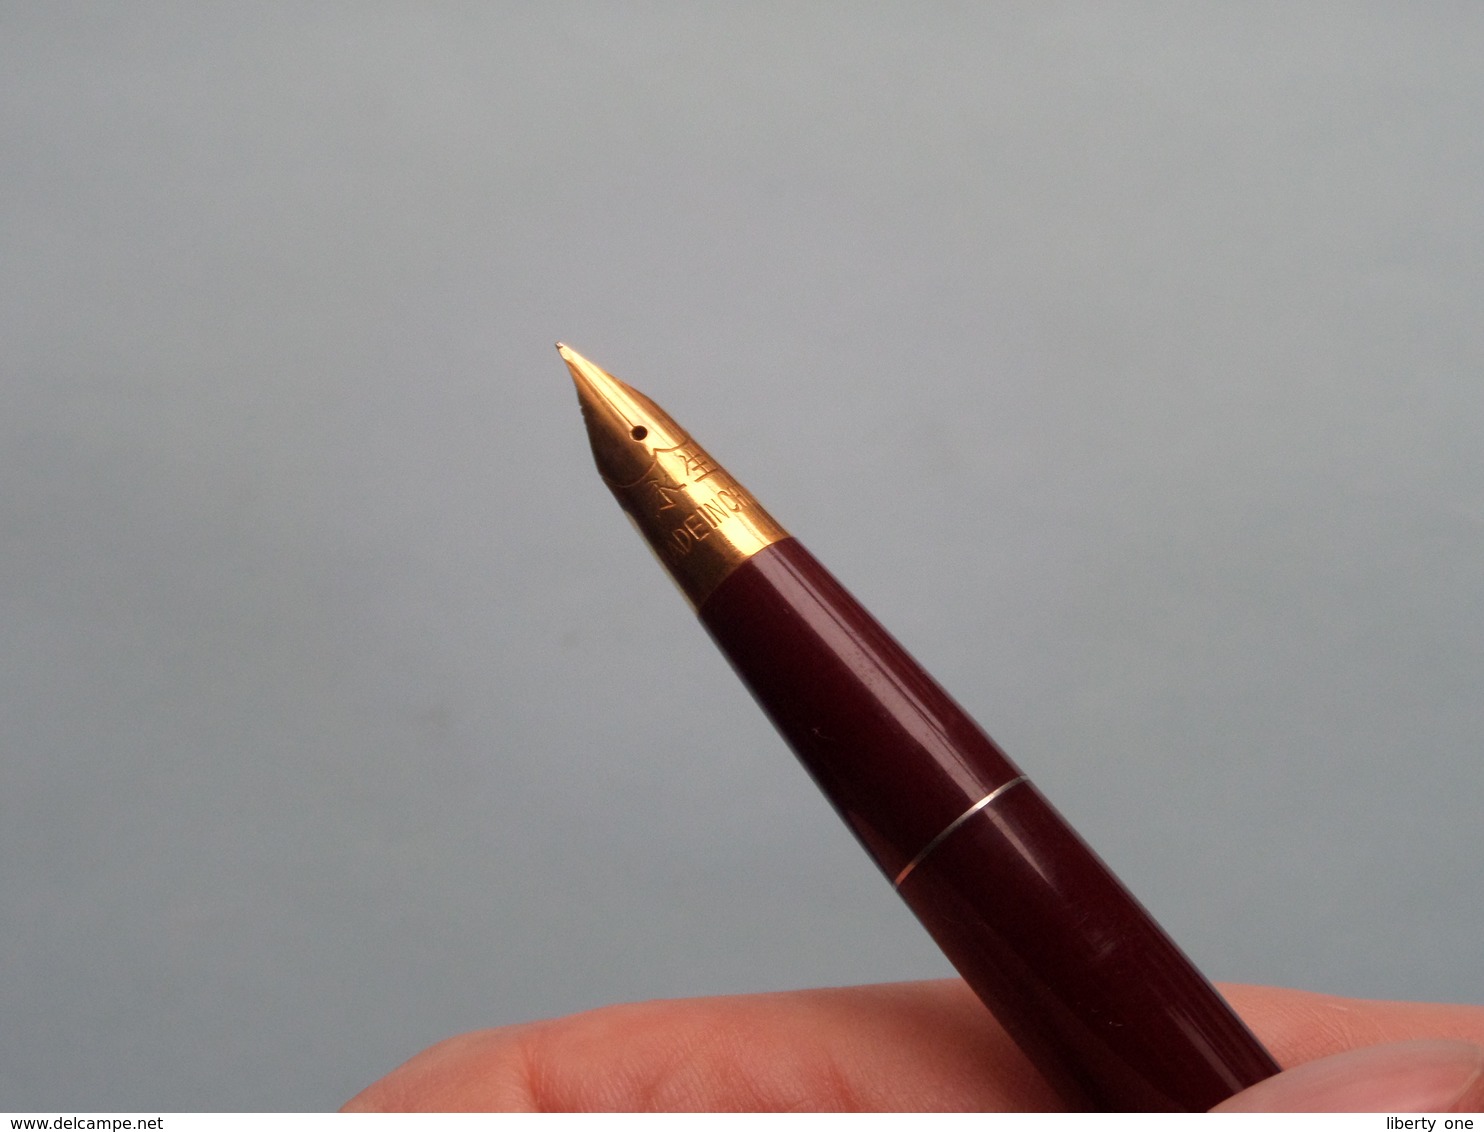 VULPEN - STYLO ( Fountain Pen / Ink - Encre - Inkt ) 14 Cm. / 17 Gram. ( Made In China > WING SUNG - 727 ) ! - Pens